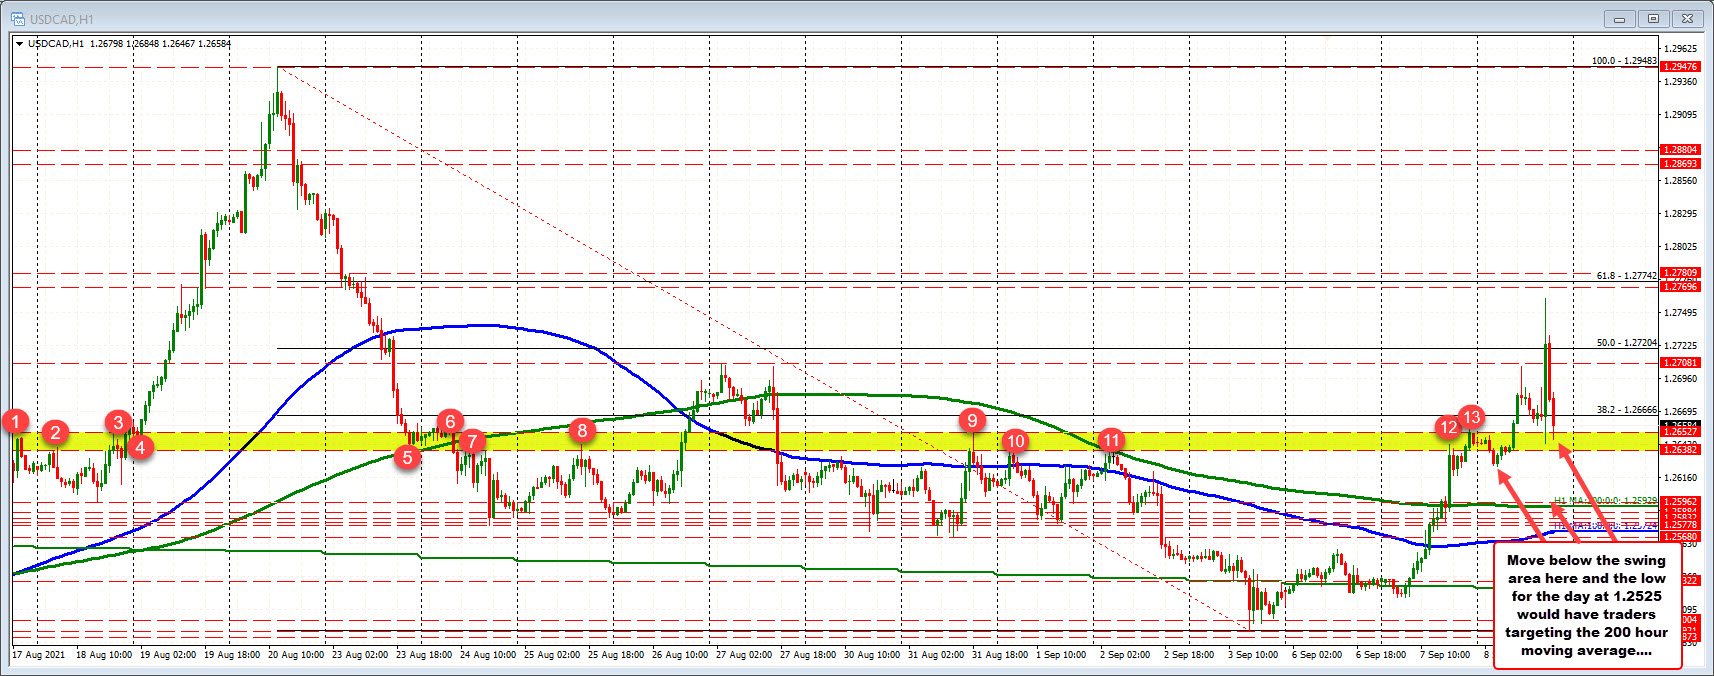 The USDCAD falls back to the low seen after the BOC rate decision